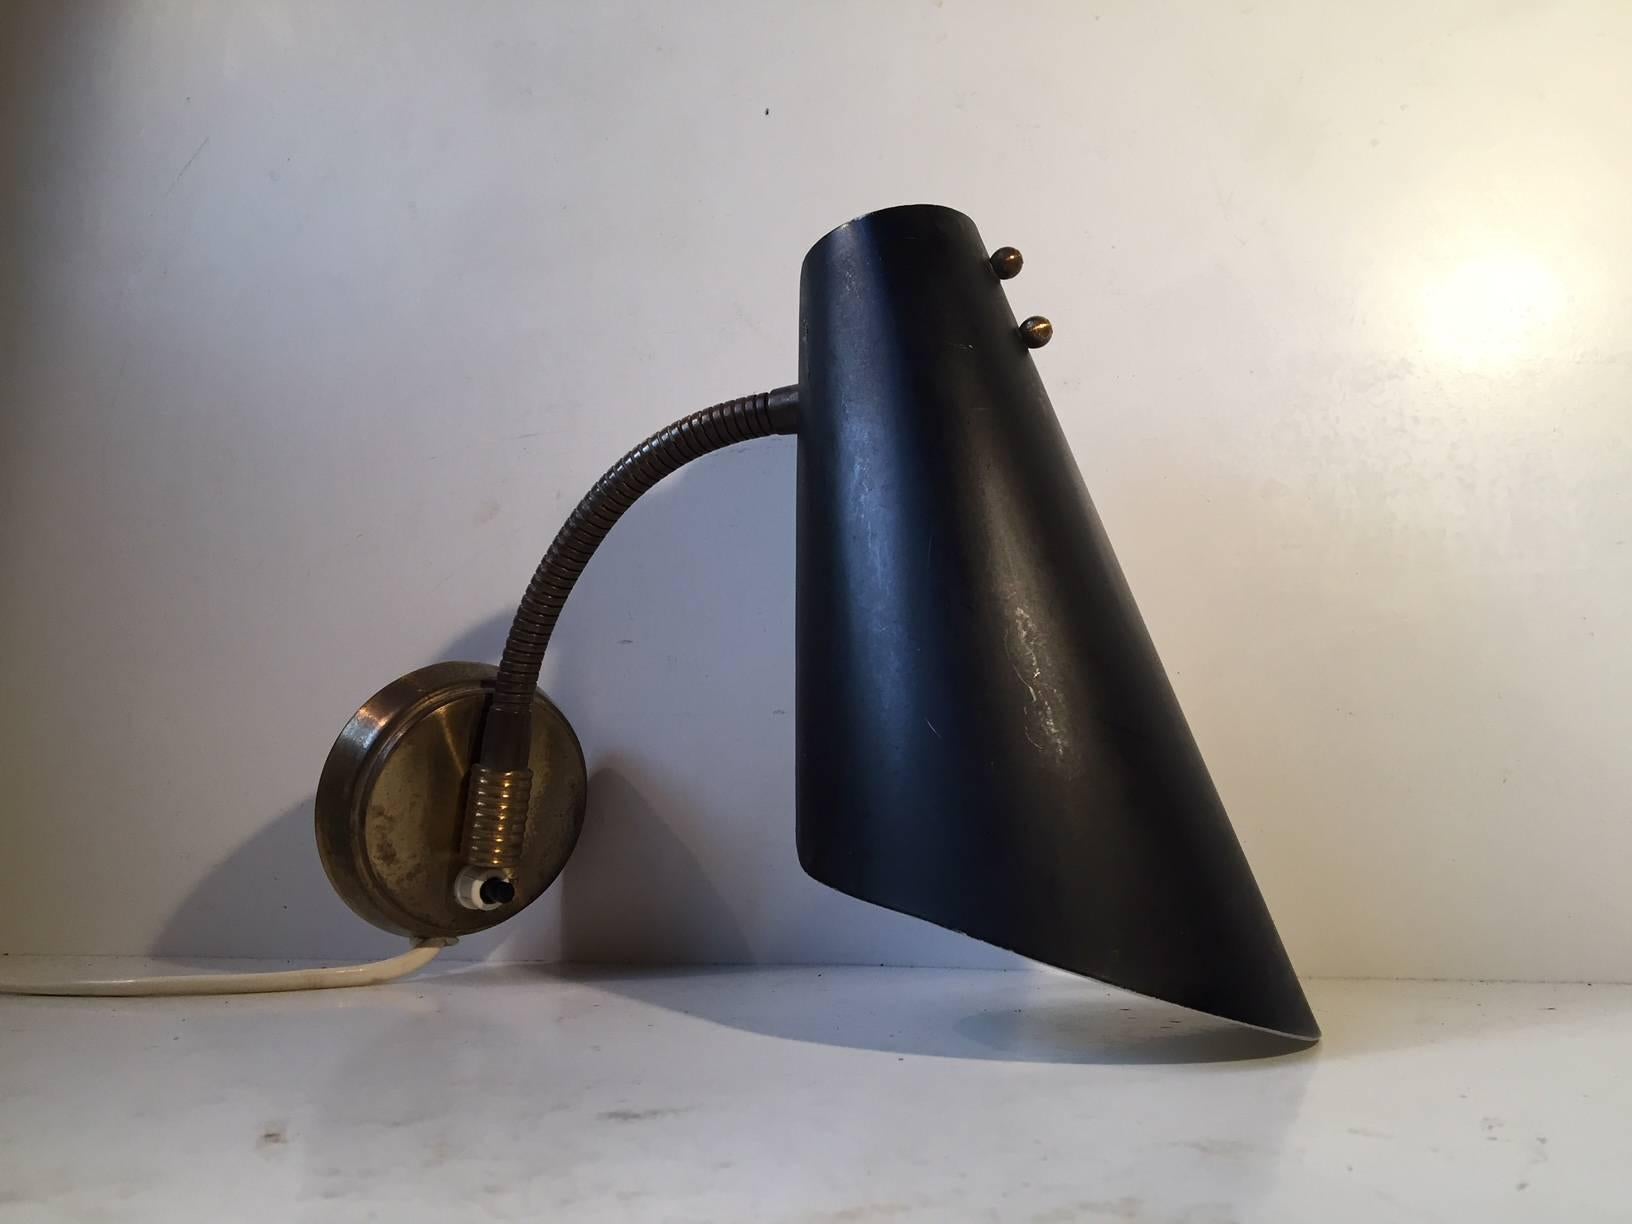 Powder-Coated Black Danish Wall Lamp with Brass Detailing by Fog & Mørup, 1950s